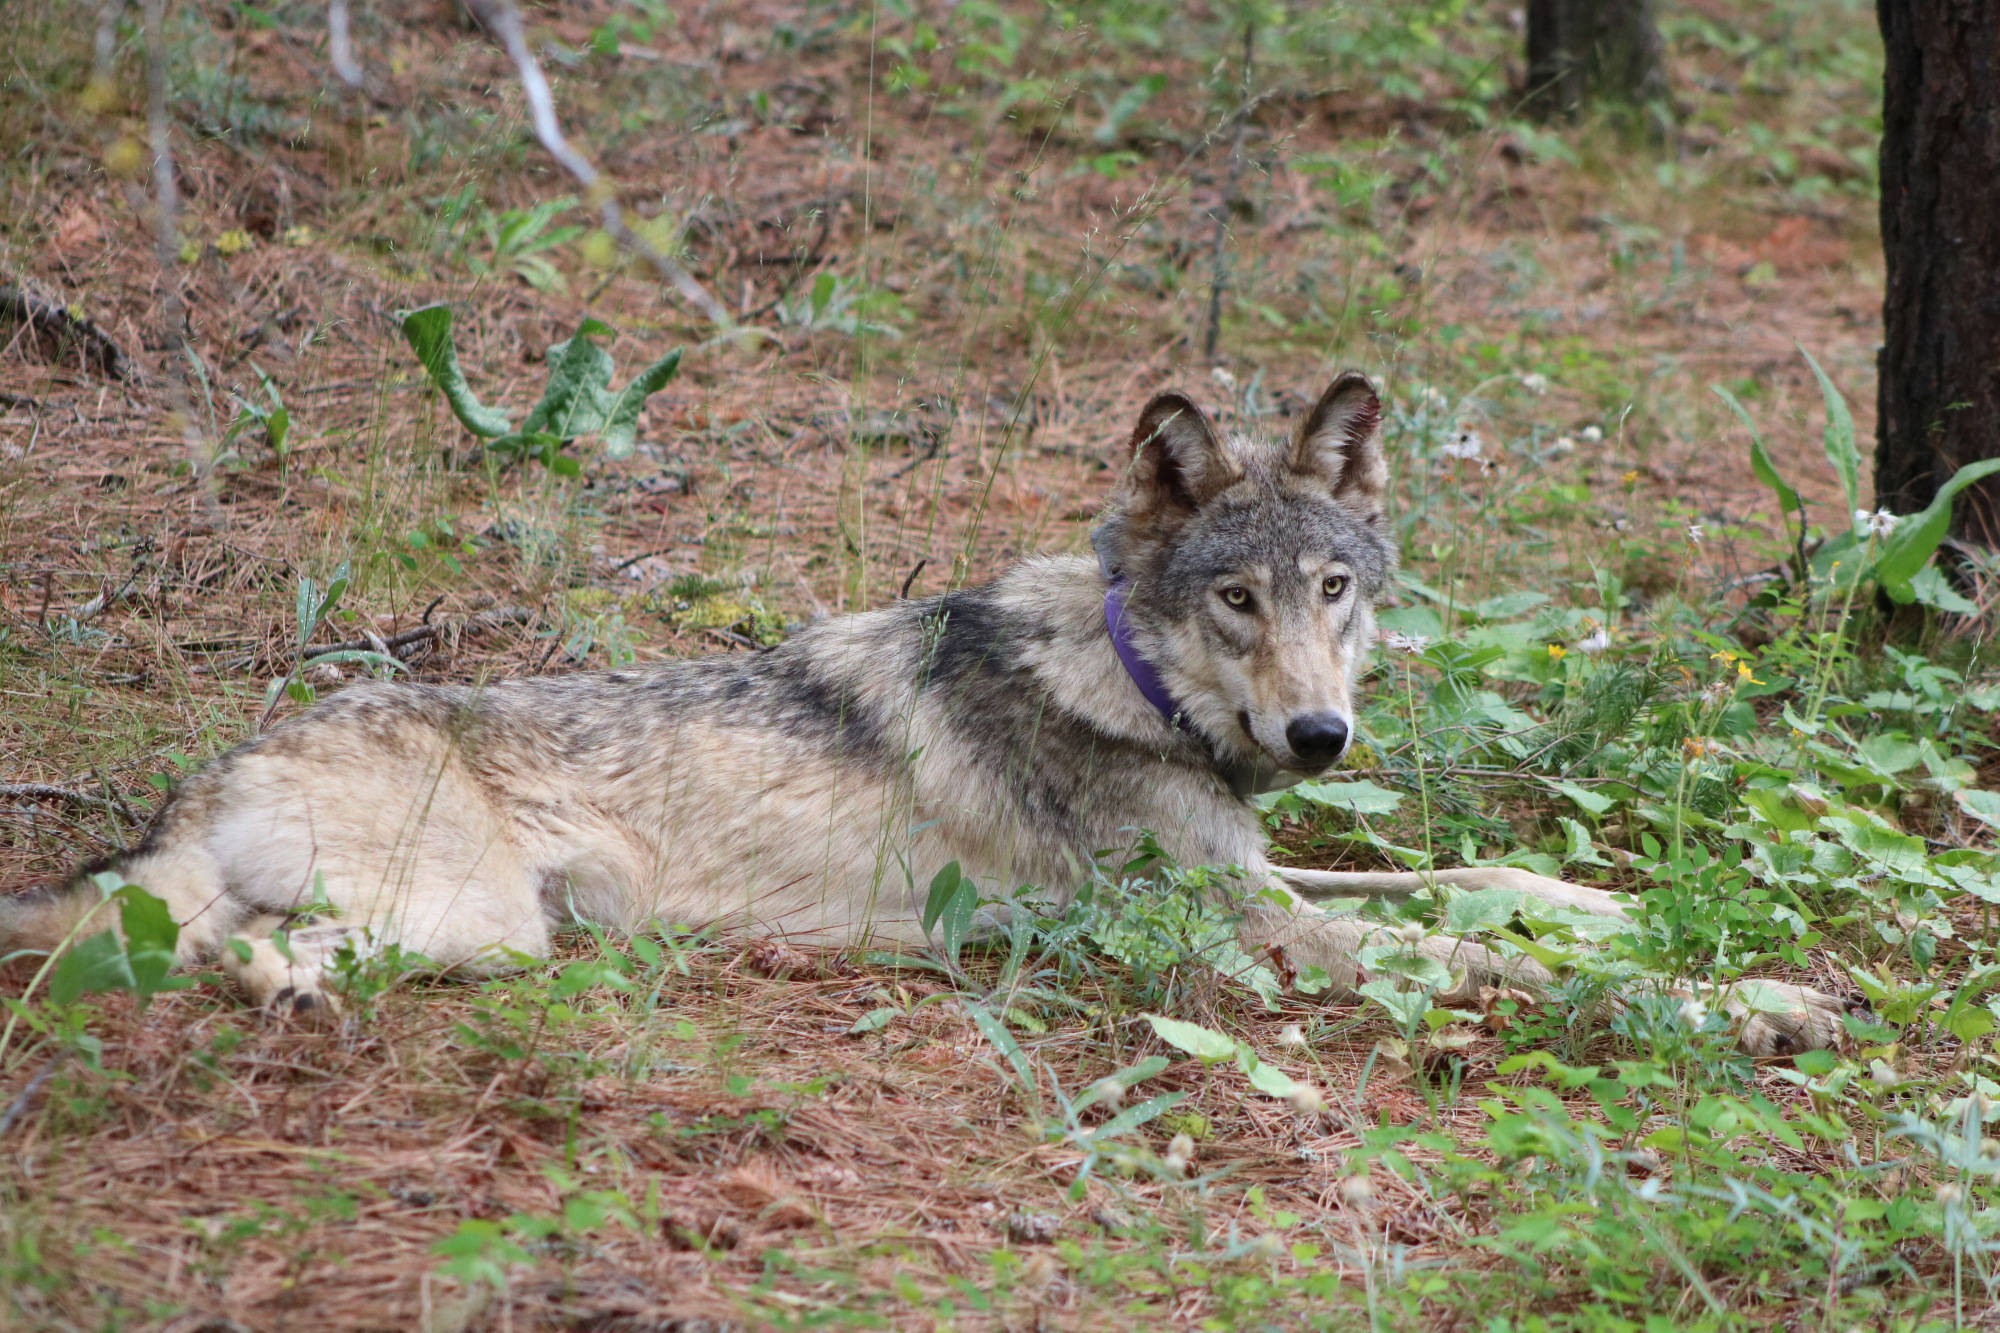 OR-93 arrived in California in late January and has ventured farther south in the state than any other wolf in more than a century. A new wolf, OR-103, has also crossed over from Oregon into California recently.
Austin Smith / Confederated Tribes of Warm Springs